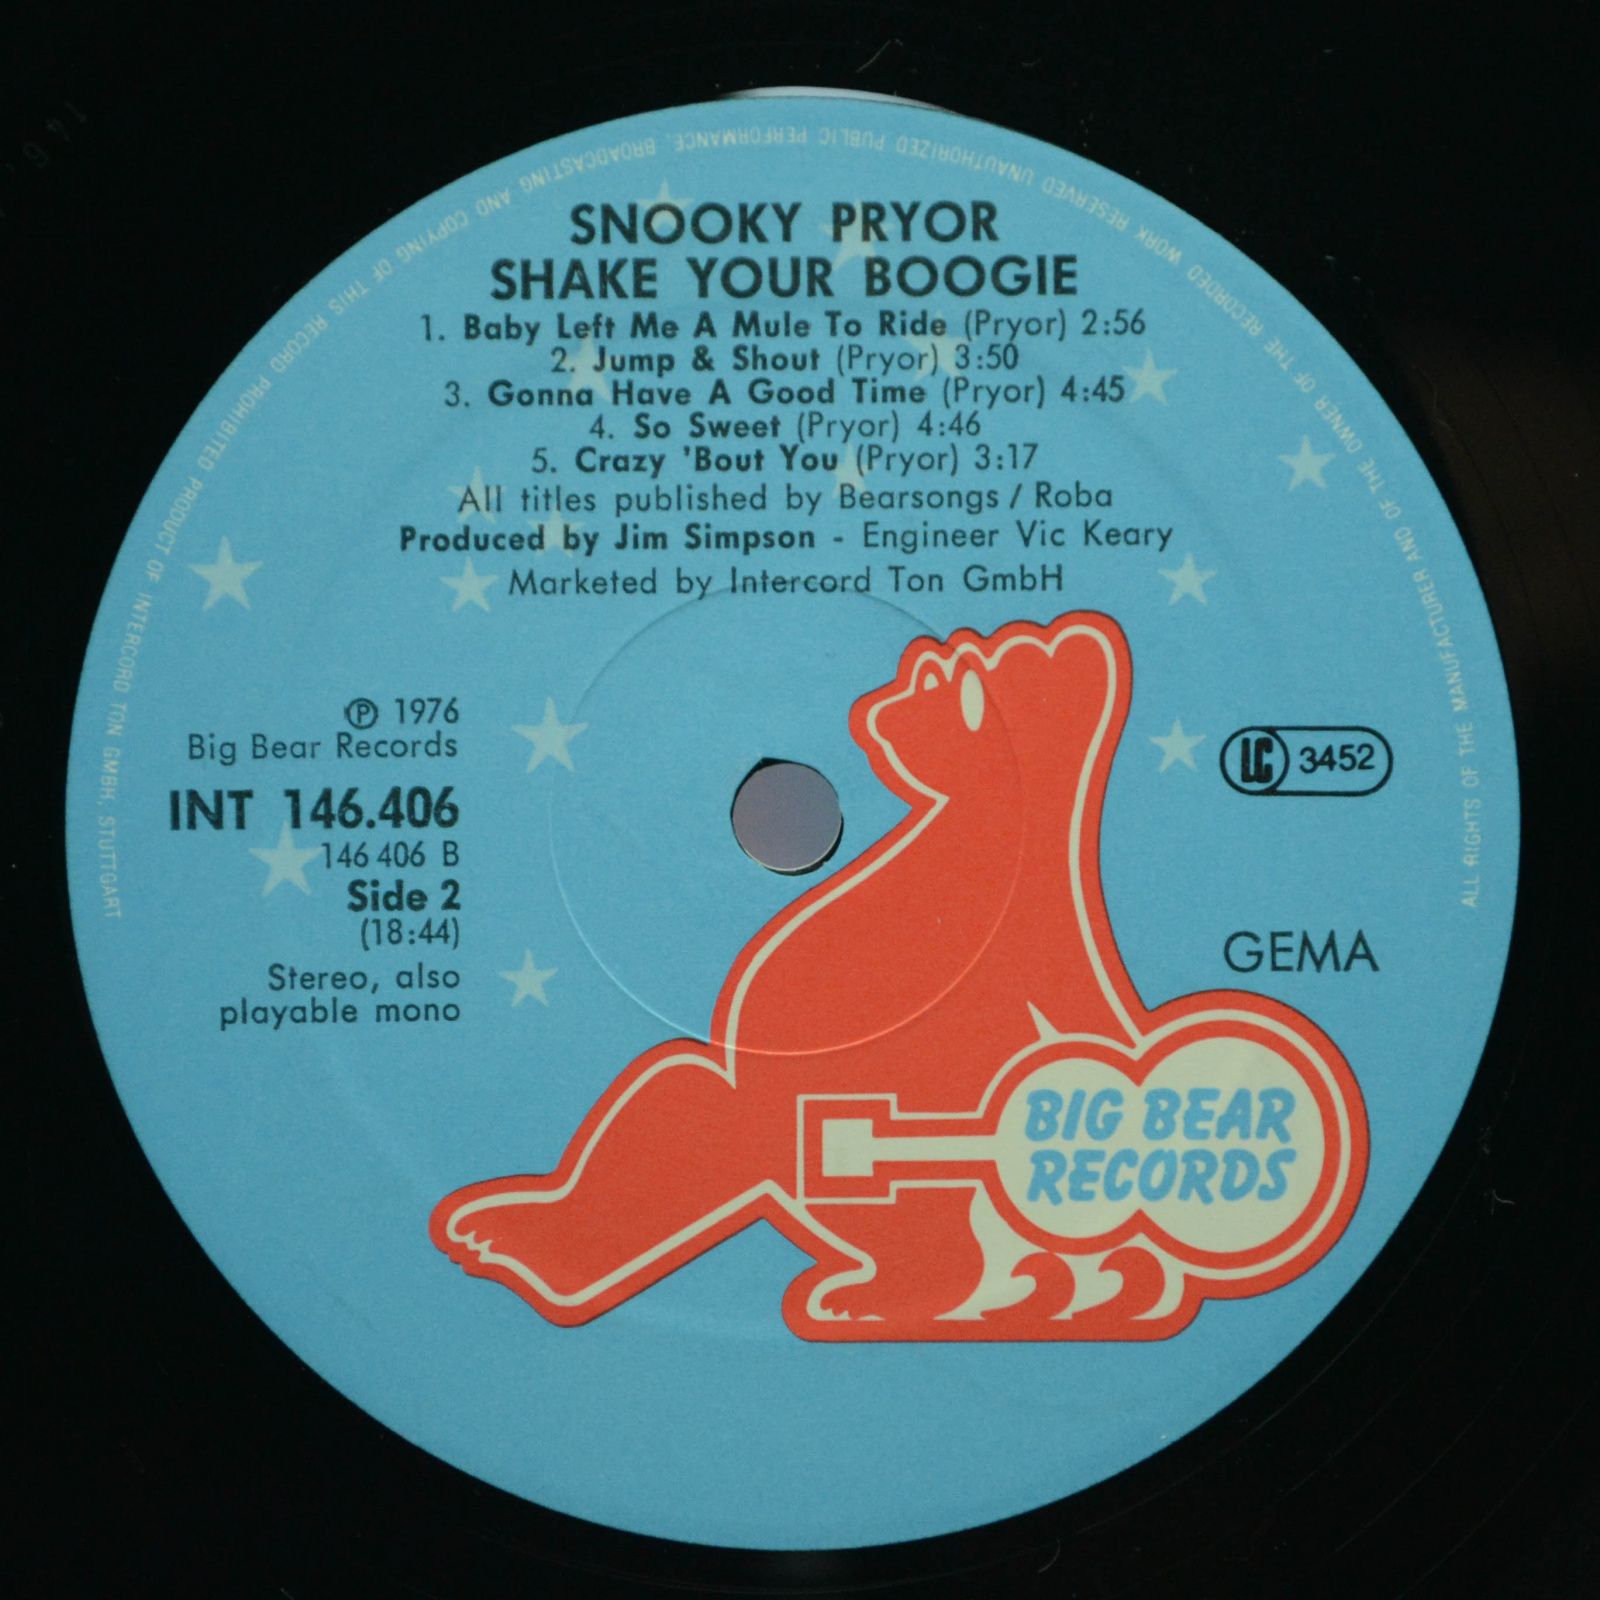 Snooky Prior — Shake Your Boogie, 1976